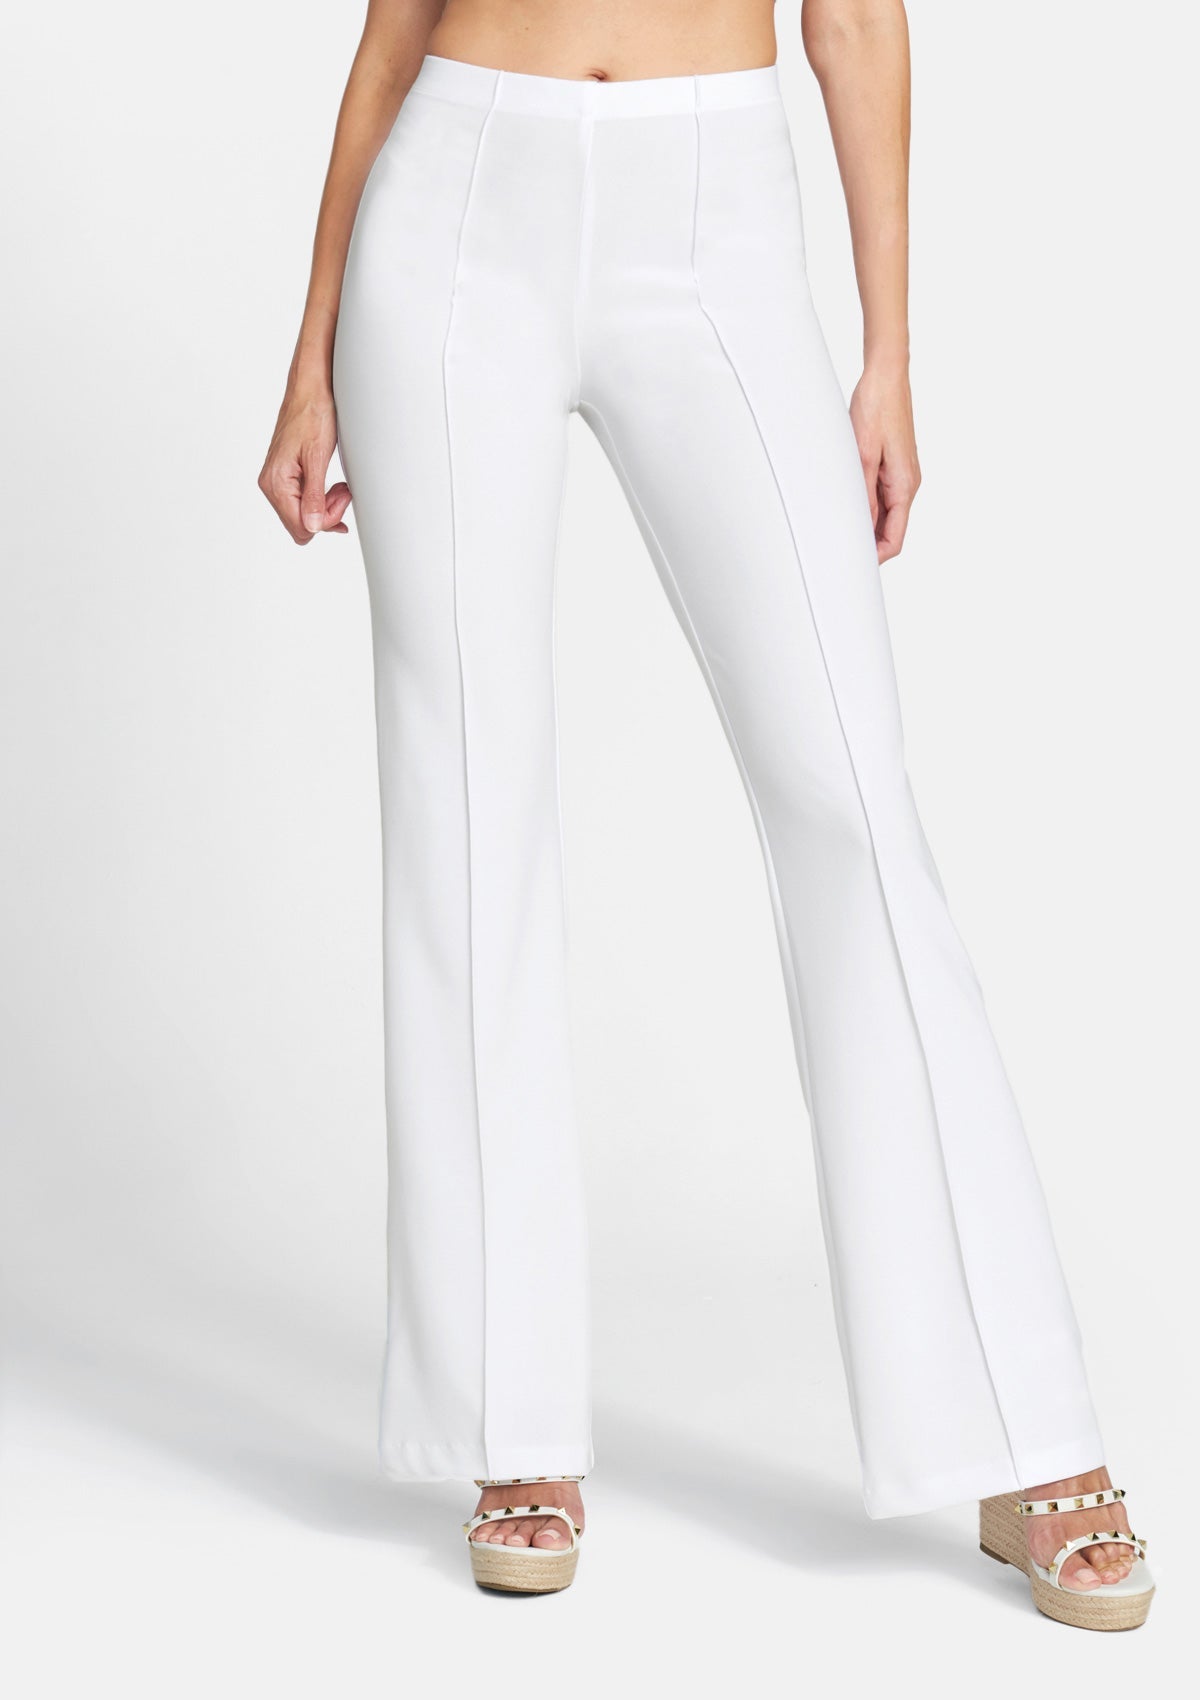 Diconna Women Solid High Elastich Flare Pants Polyester White S 